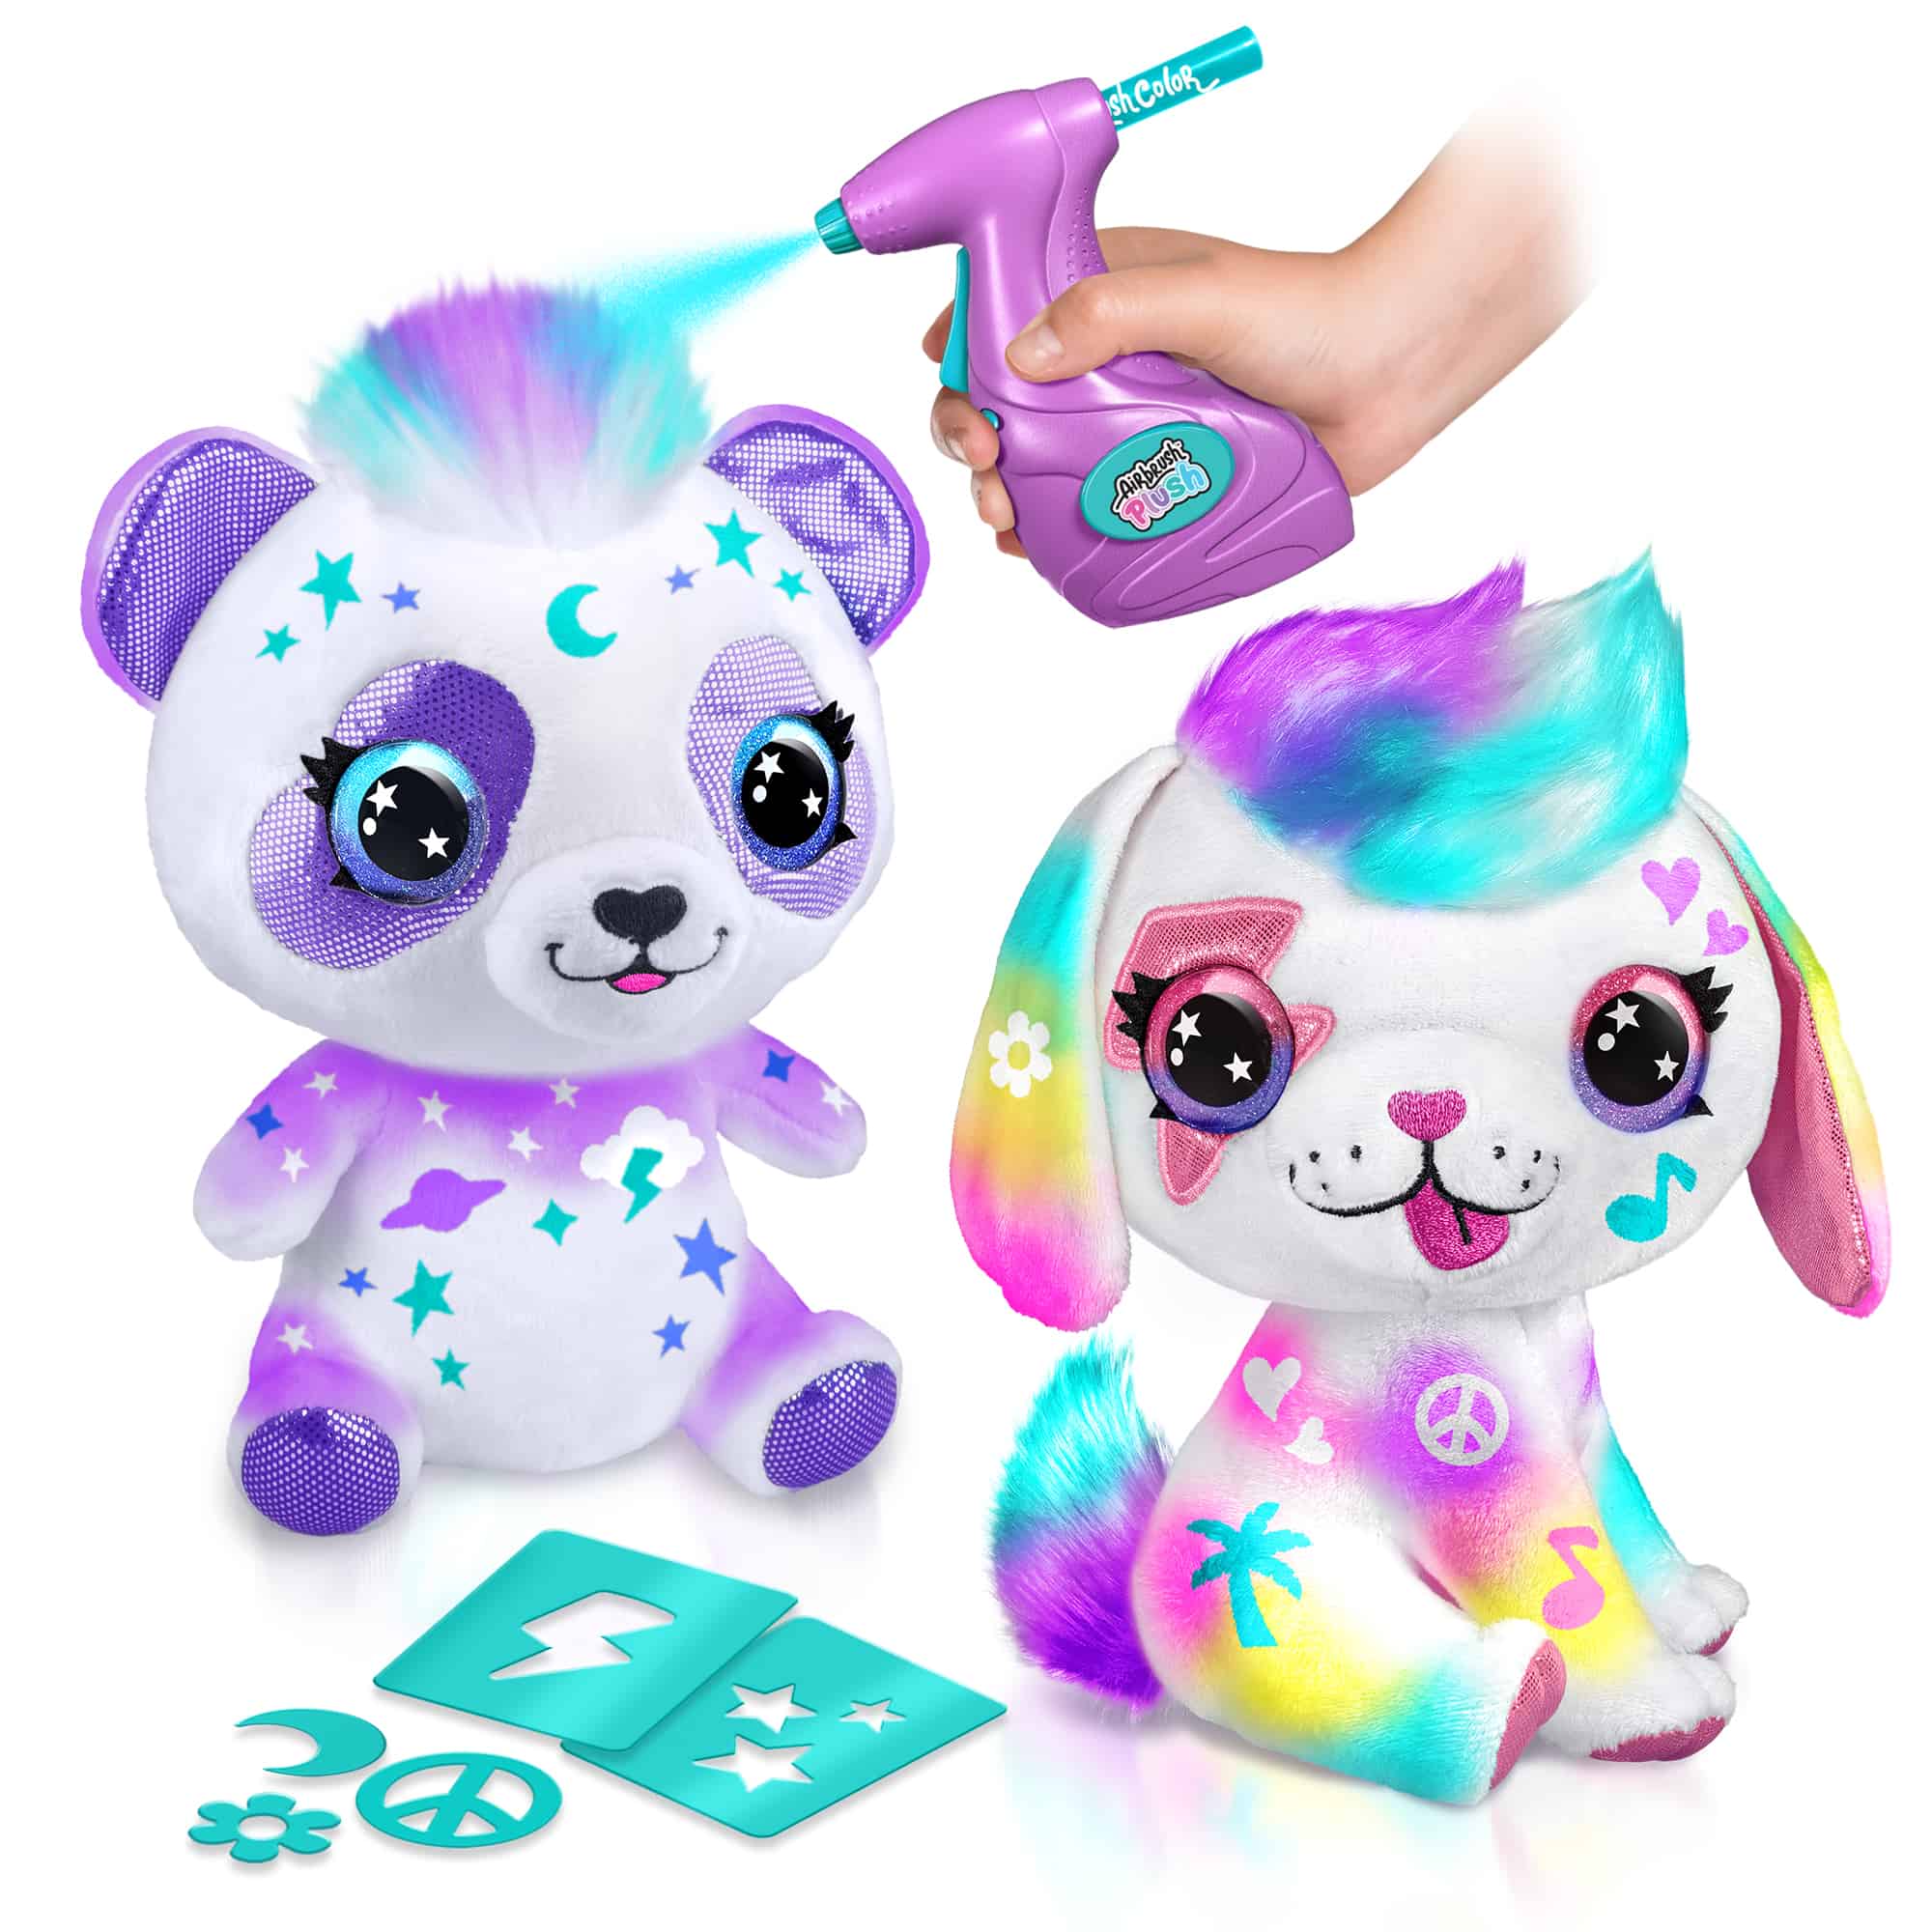  Canal Toys Personalize Airbrush Plush Large Puppy! Decorate,  wash, Repeat! Customize Your own Spray Art Plush with Markers, Battery  Powered Airbrush and 100+ Stencils. Ages 6+ : Everything Else